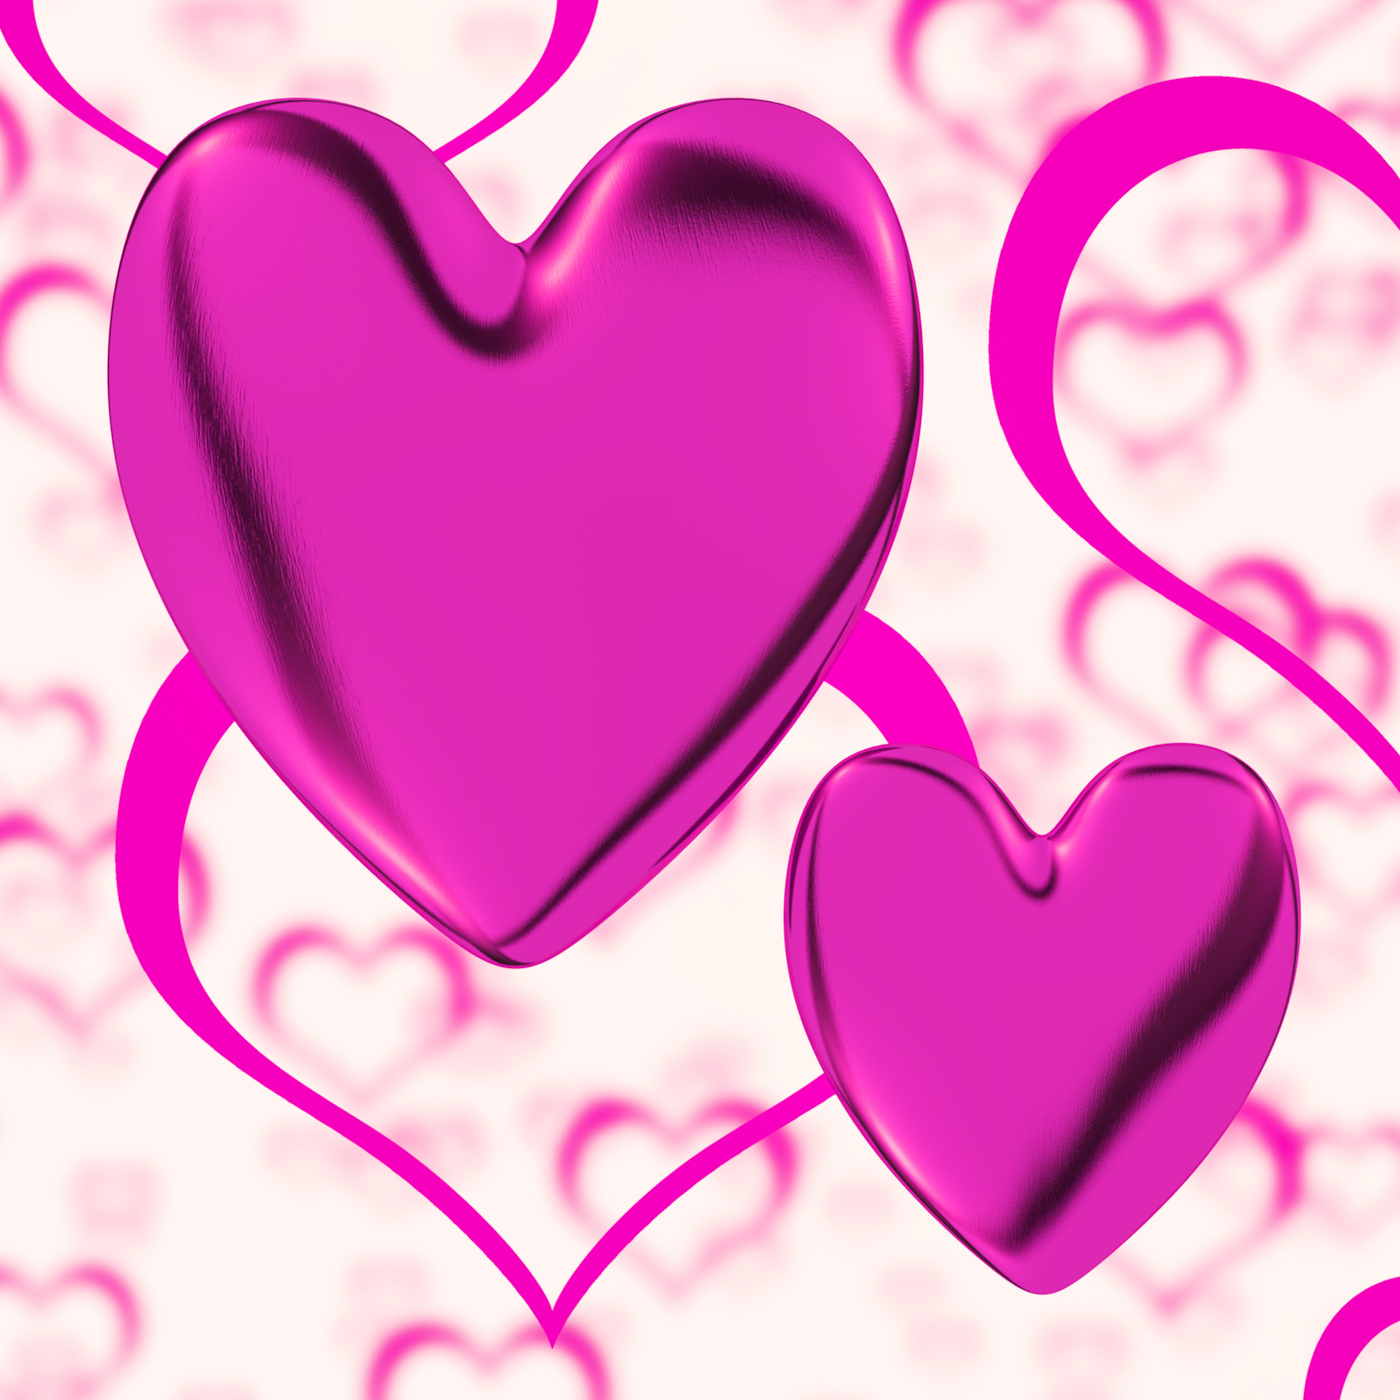 Mauve hearts on a heart background showing love romance and romantic f photo